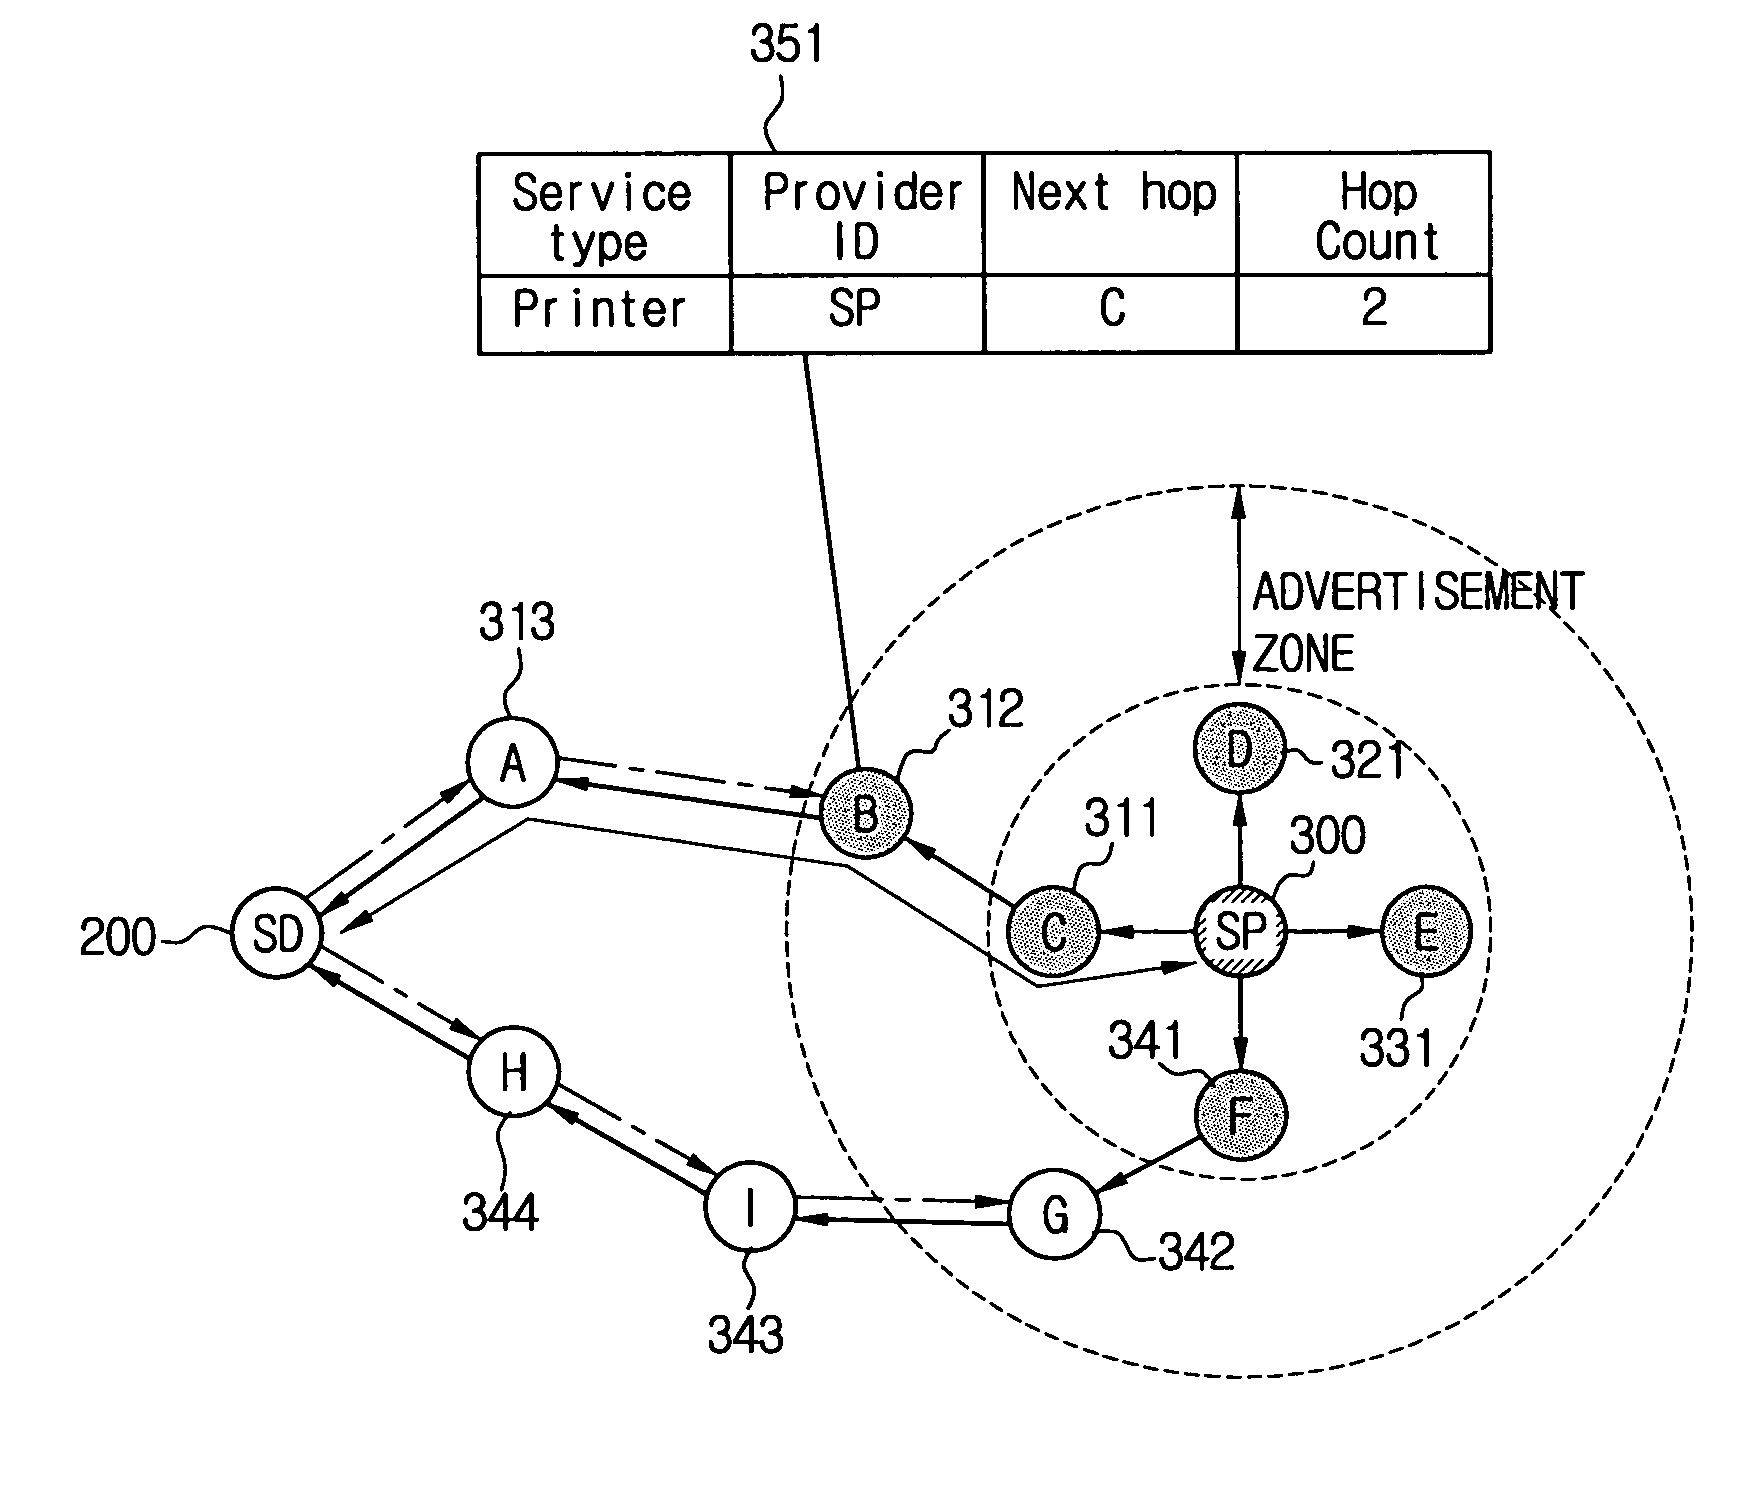 Method for service discovery in mobile ad-hoc network